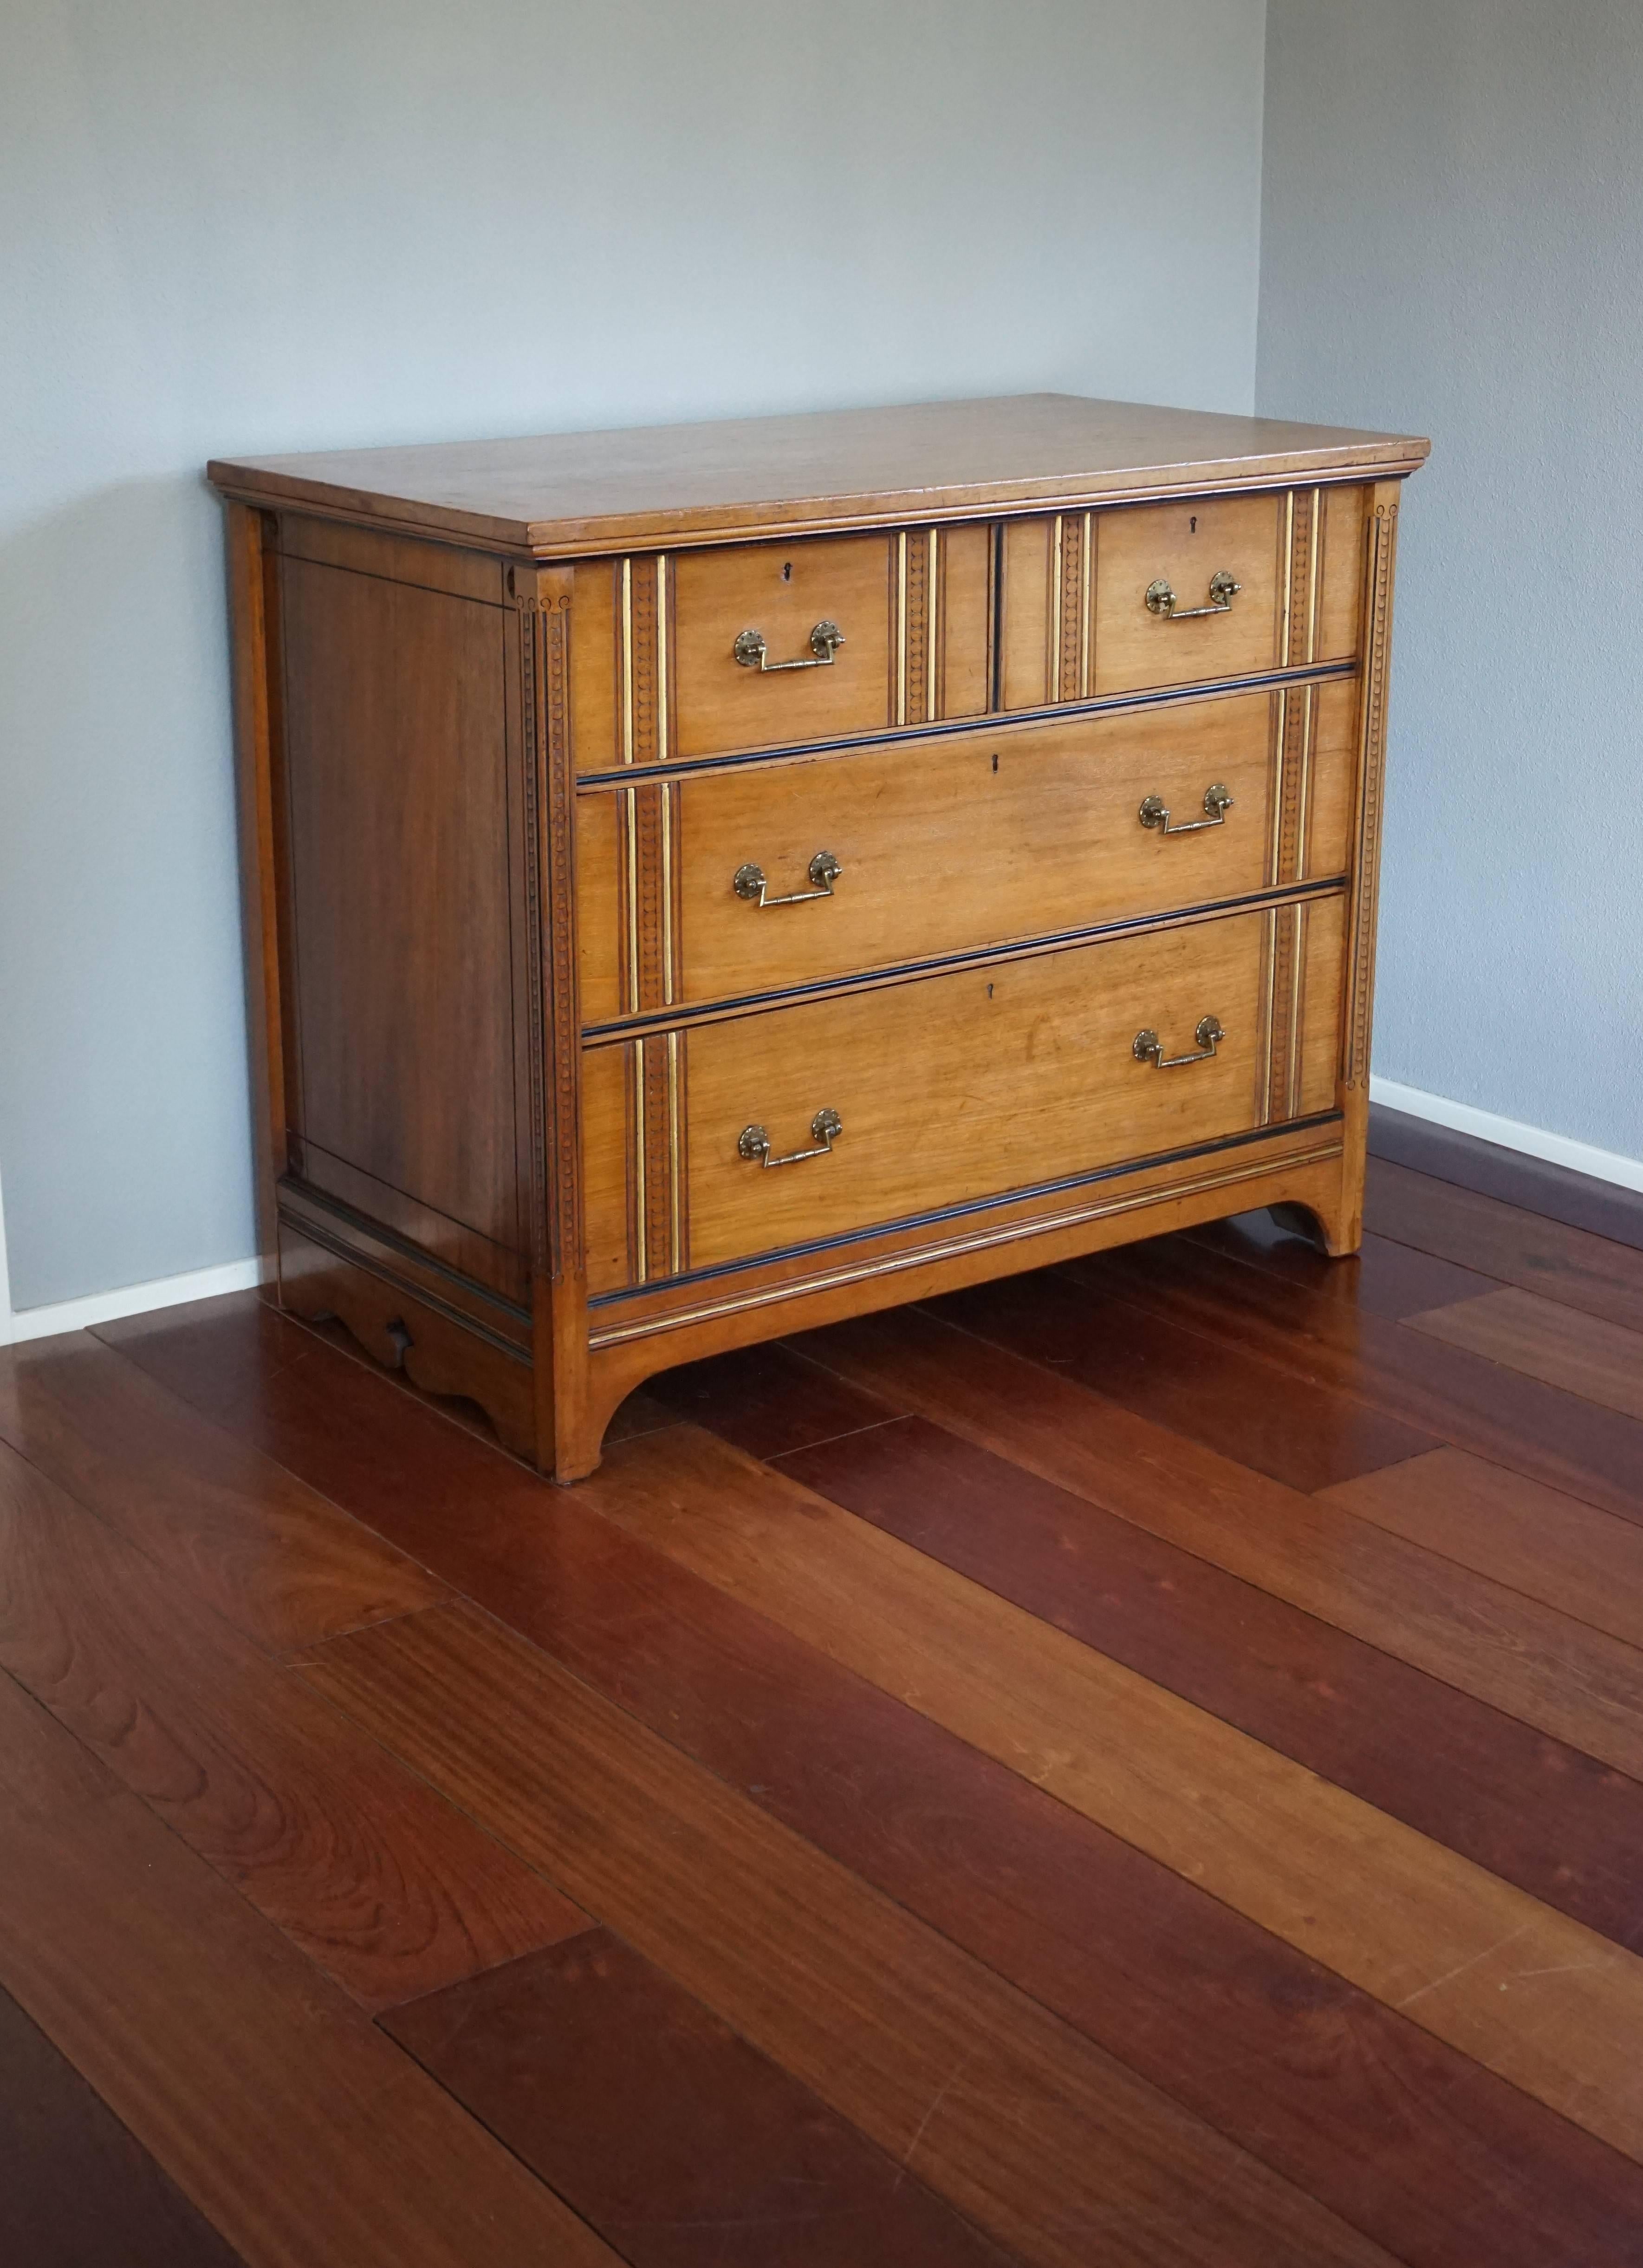 Aesthetic Movement Arts and Crafts Gillow & Co Chest of Drawers / Commode 1880s 2